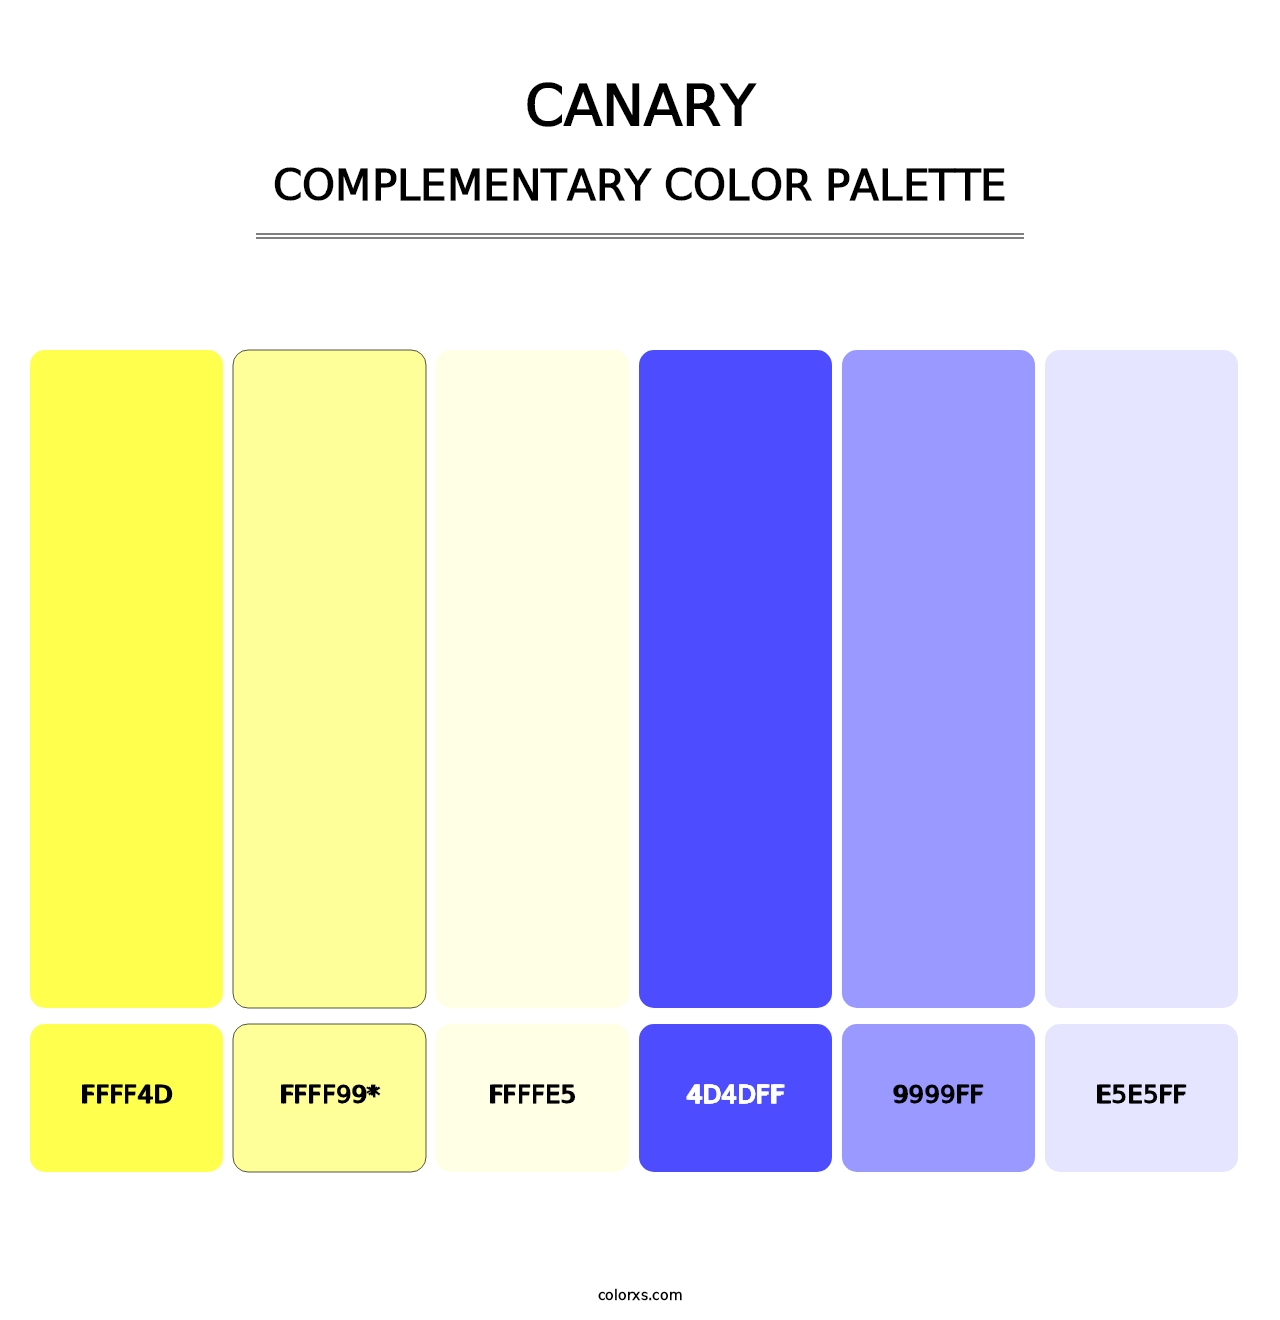 Canary - Complementary Color Palette